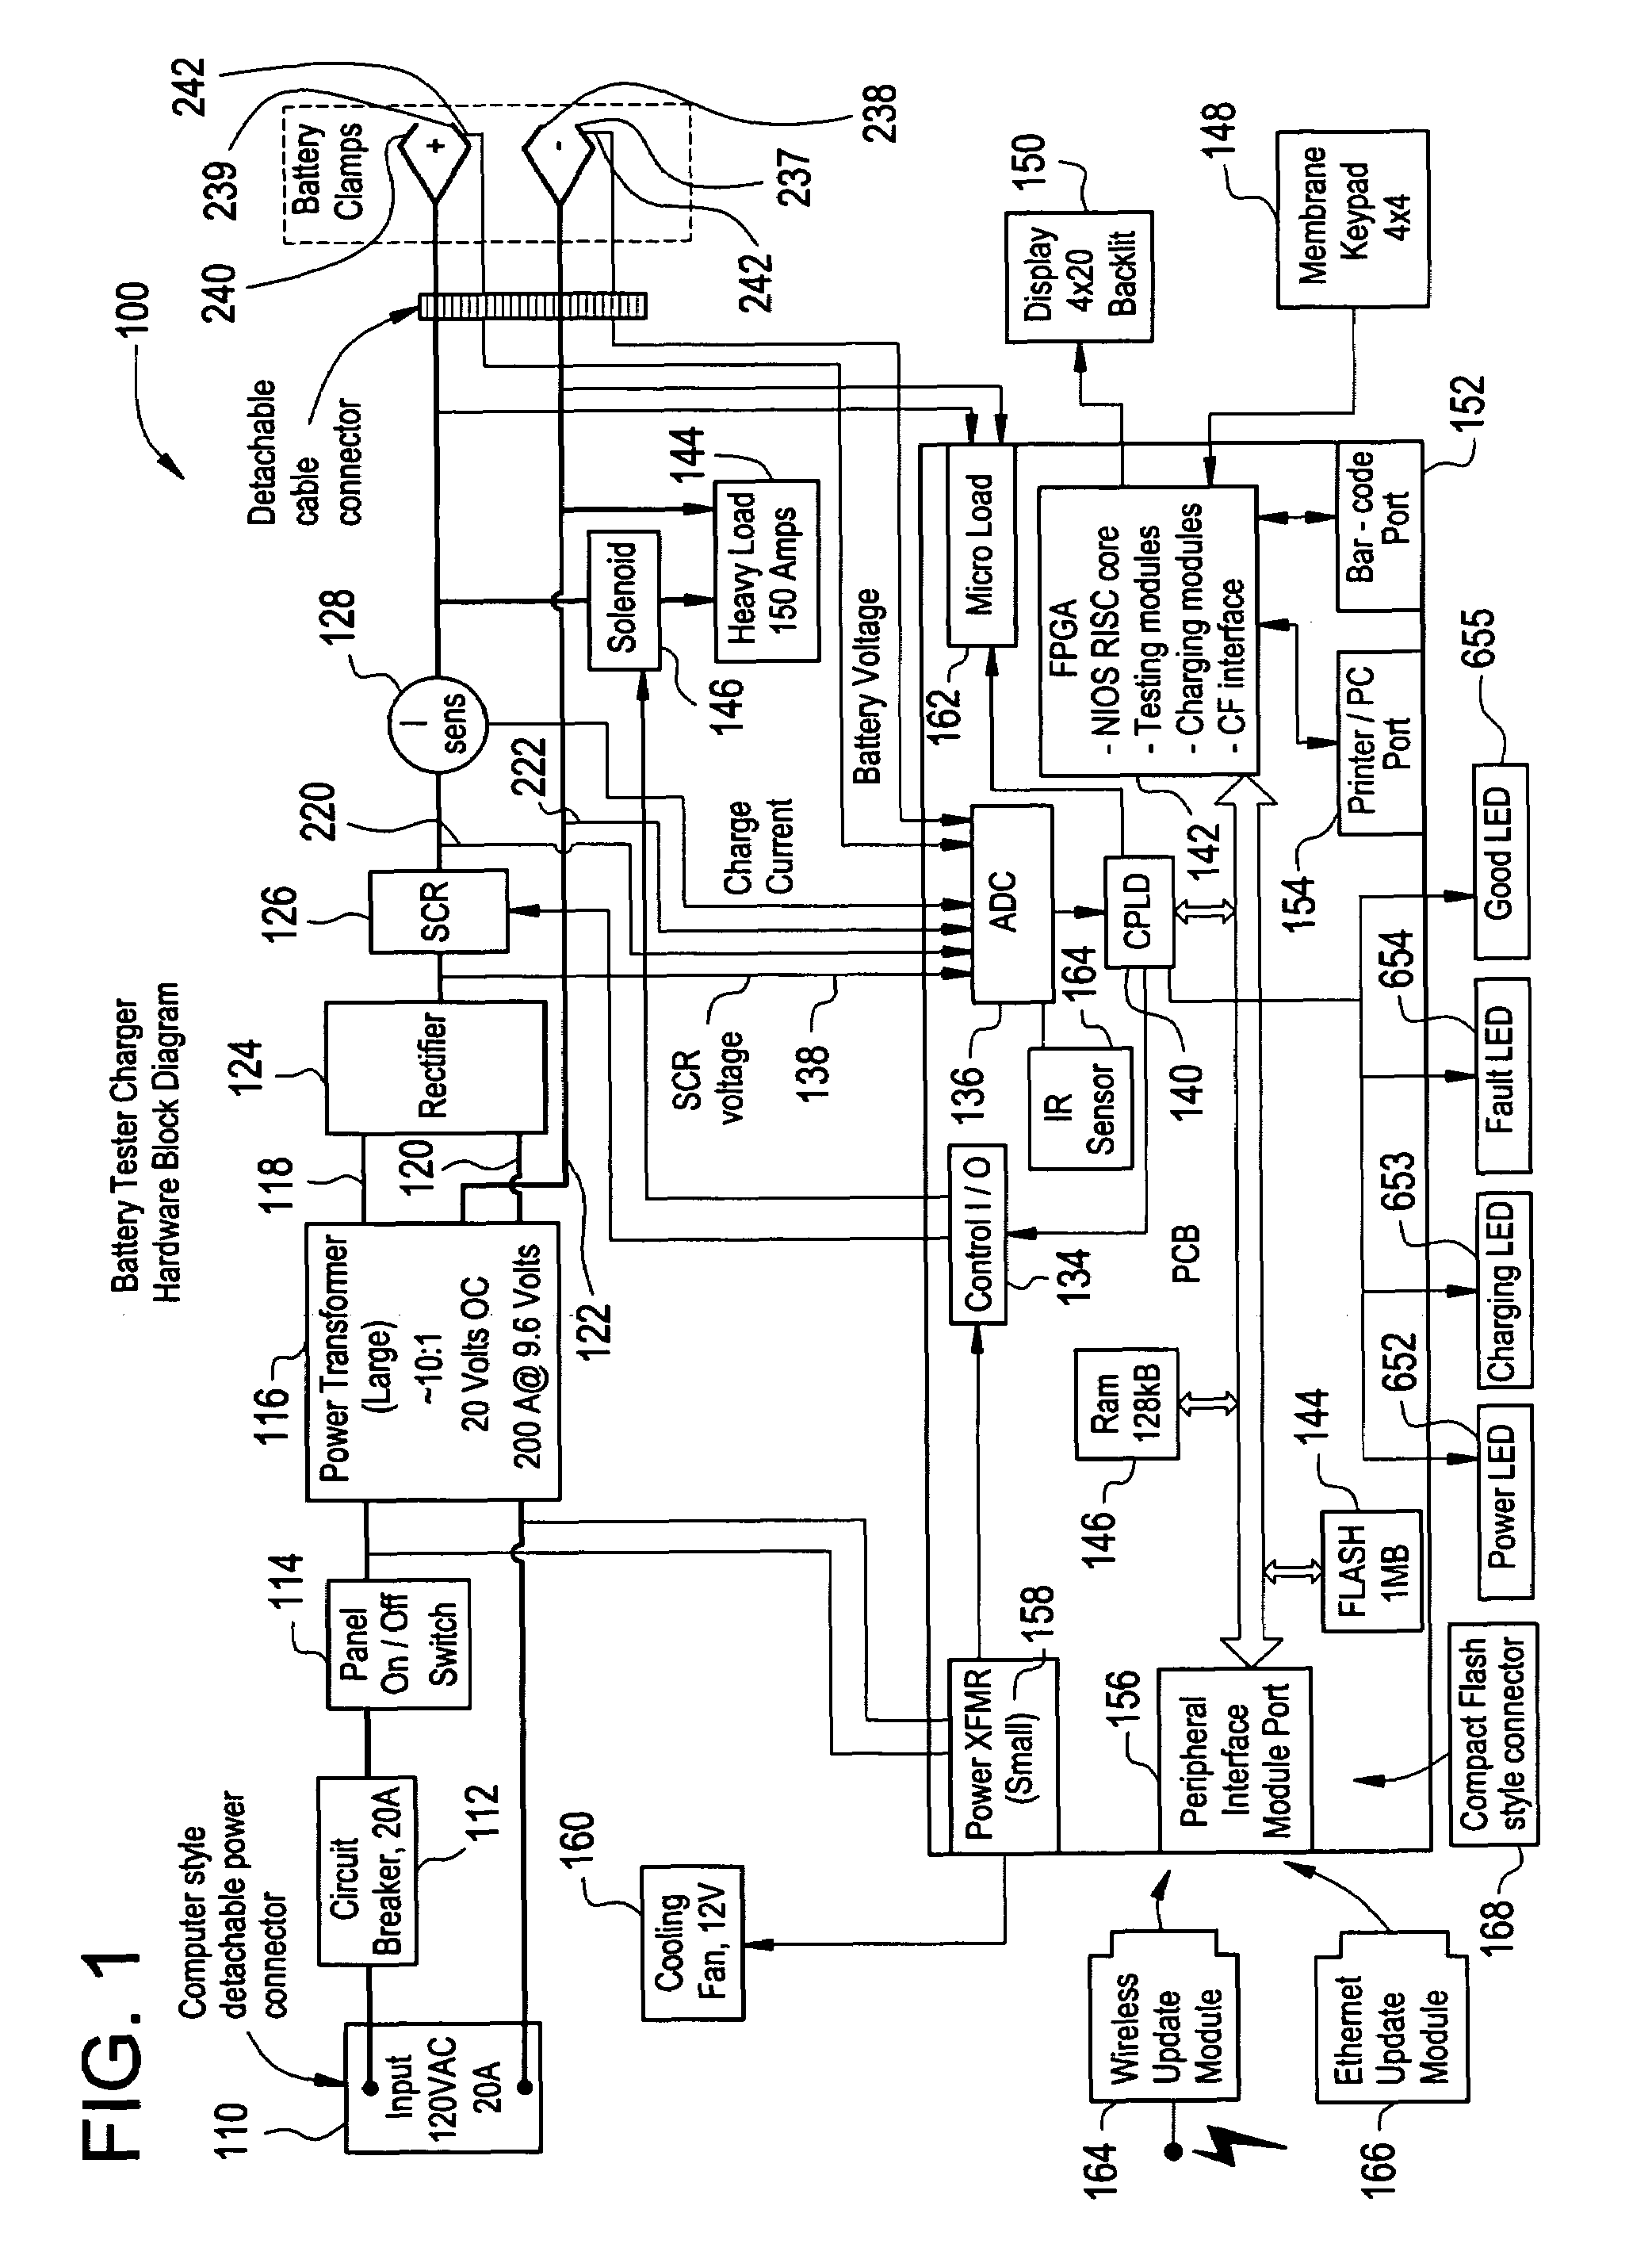 Apparatus and method for determining the temperature of a charging power source